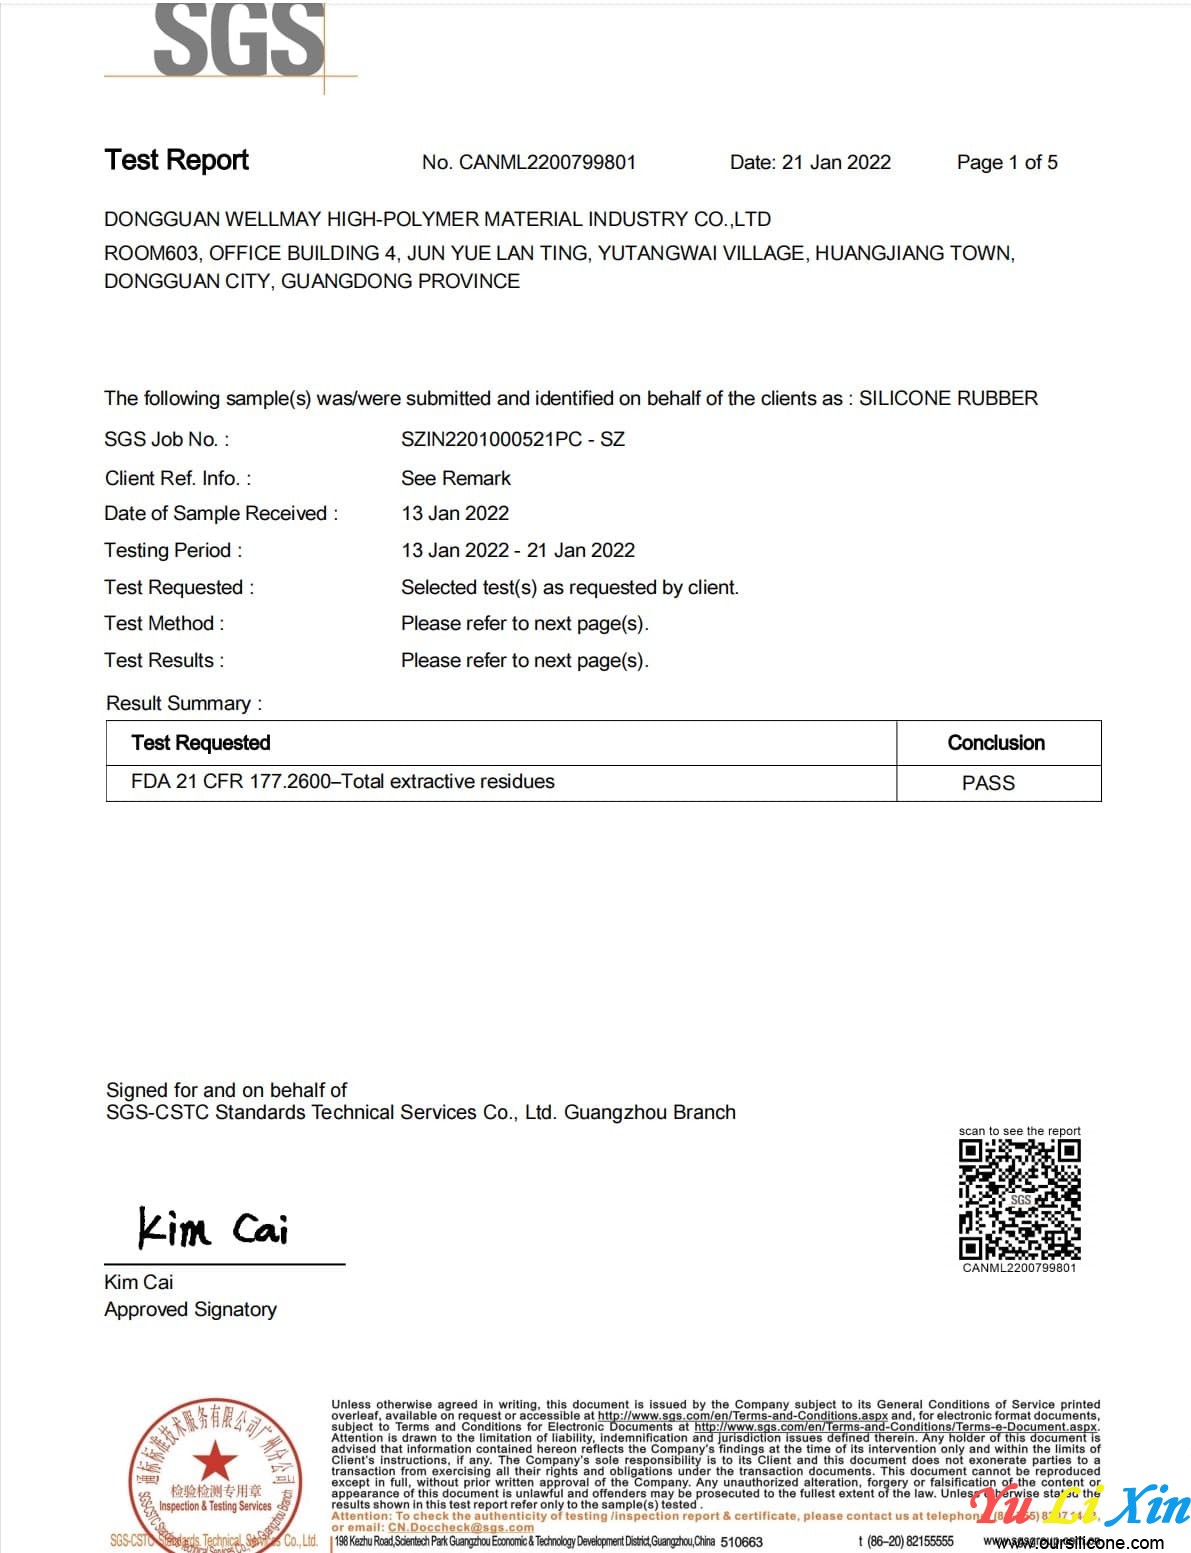 Food Grade Certification For Our Products